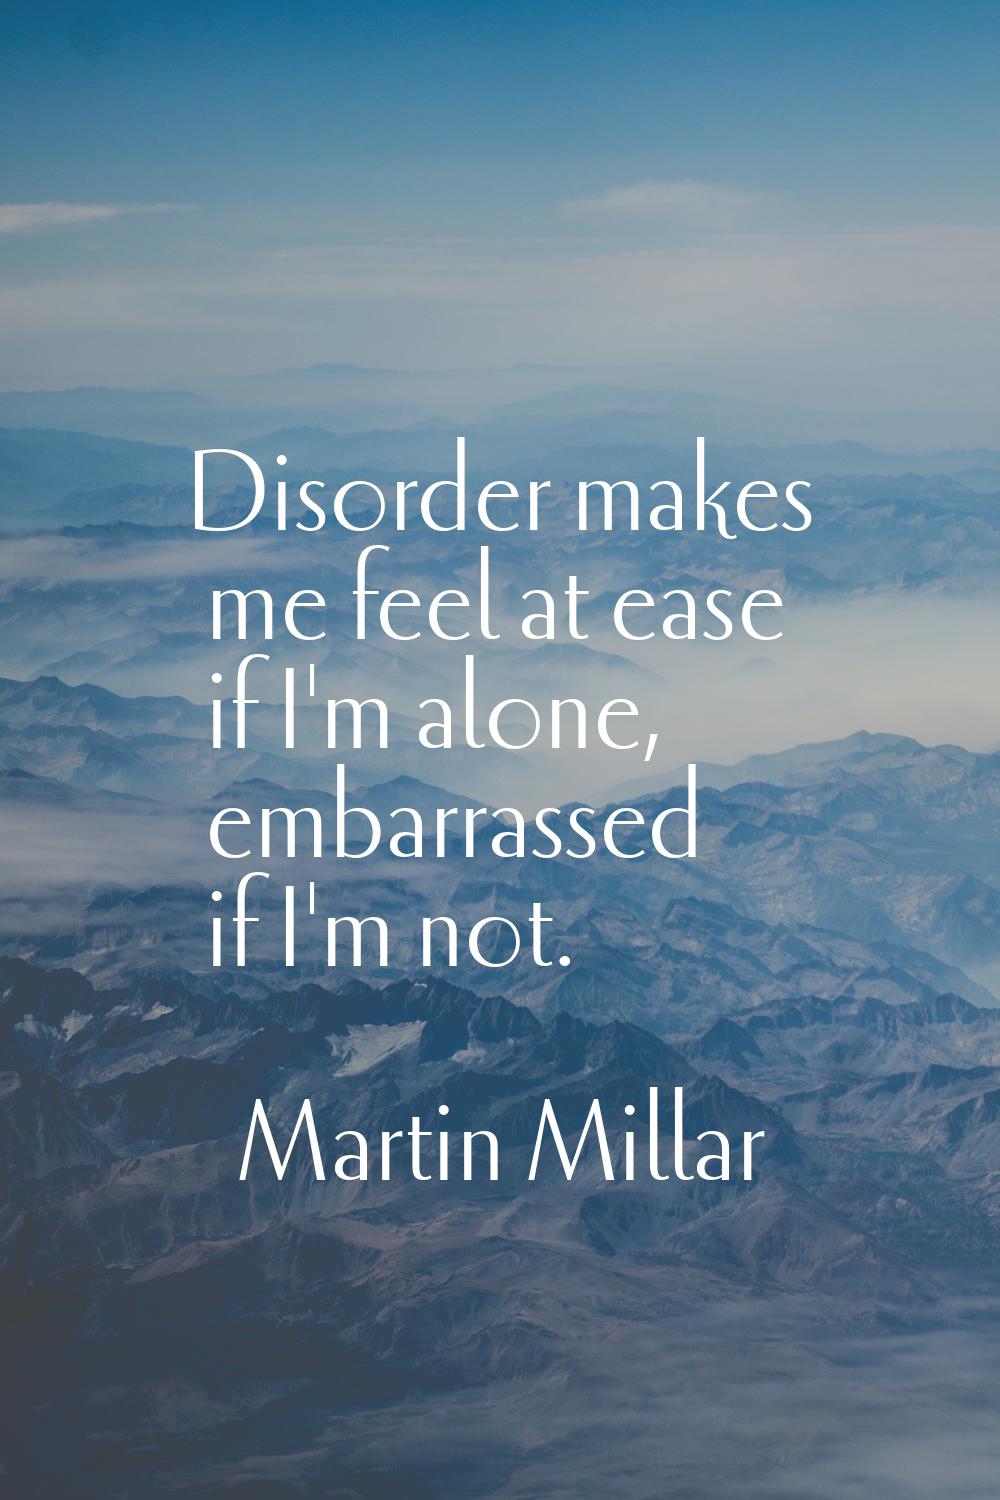 Disorder makes me feel at ease if I'm alone, embarrassed if I'm not.